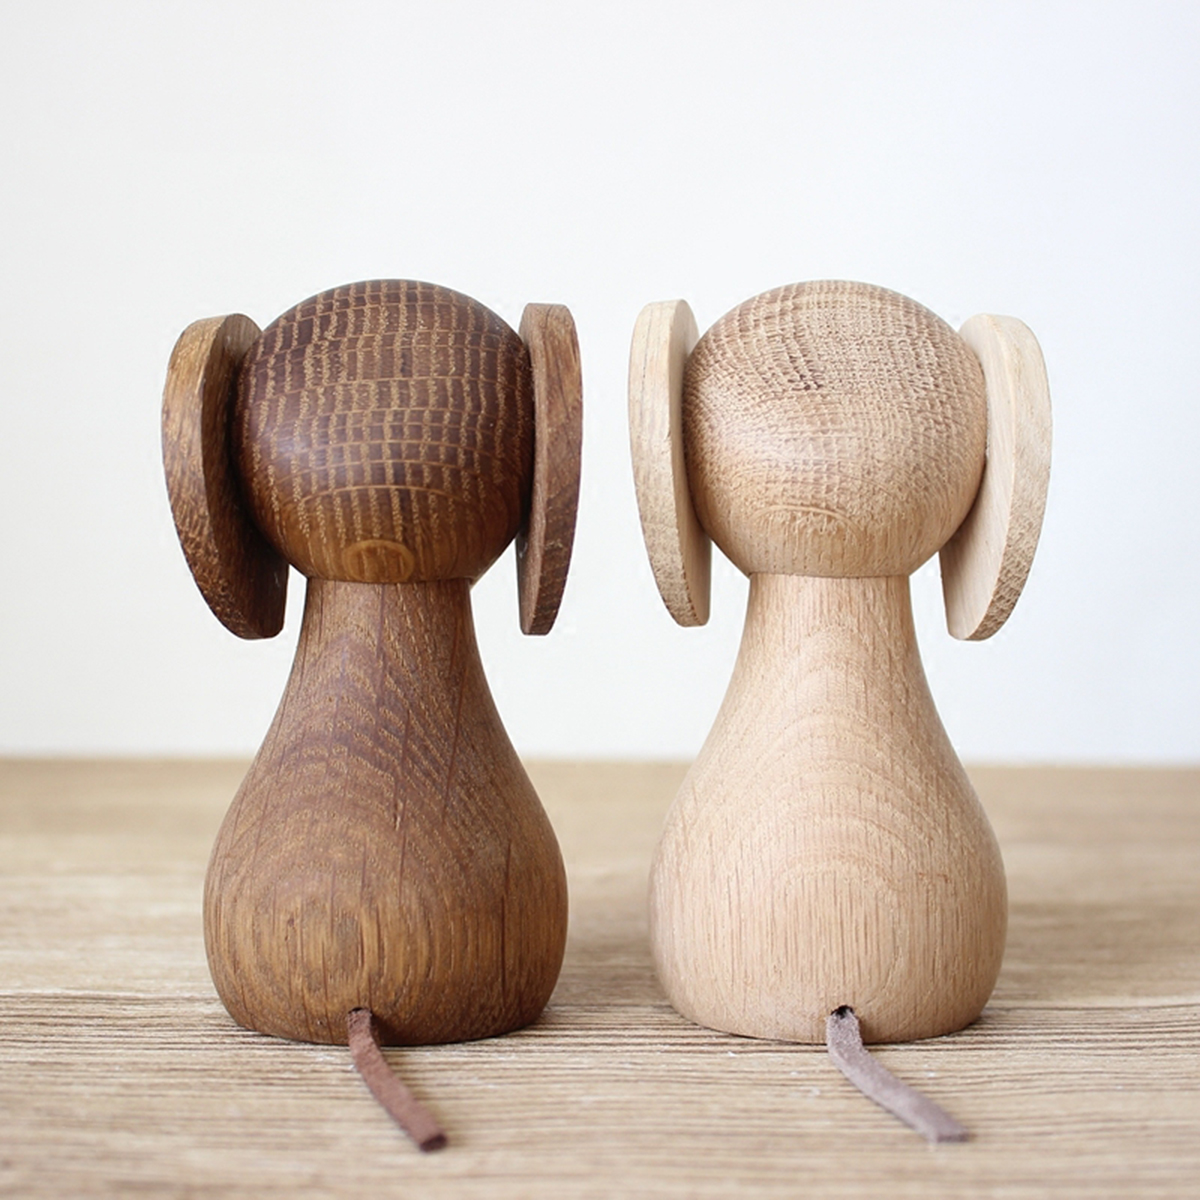 Adjustable-Handicraft-Elephant-Wooden-Animal-Doll-Smooth-Surface-Home-Decorations-Gift-1640775-4